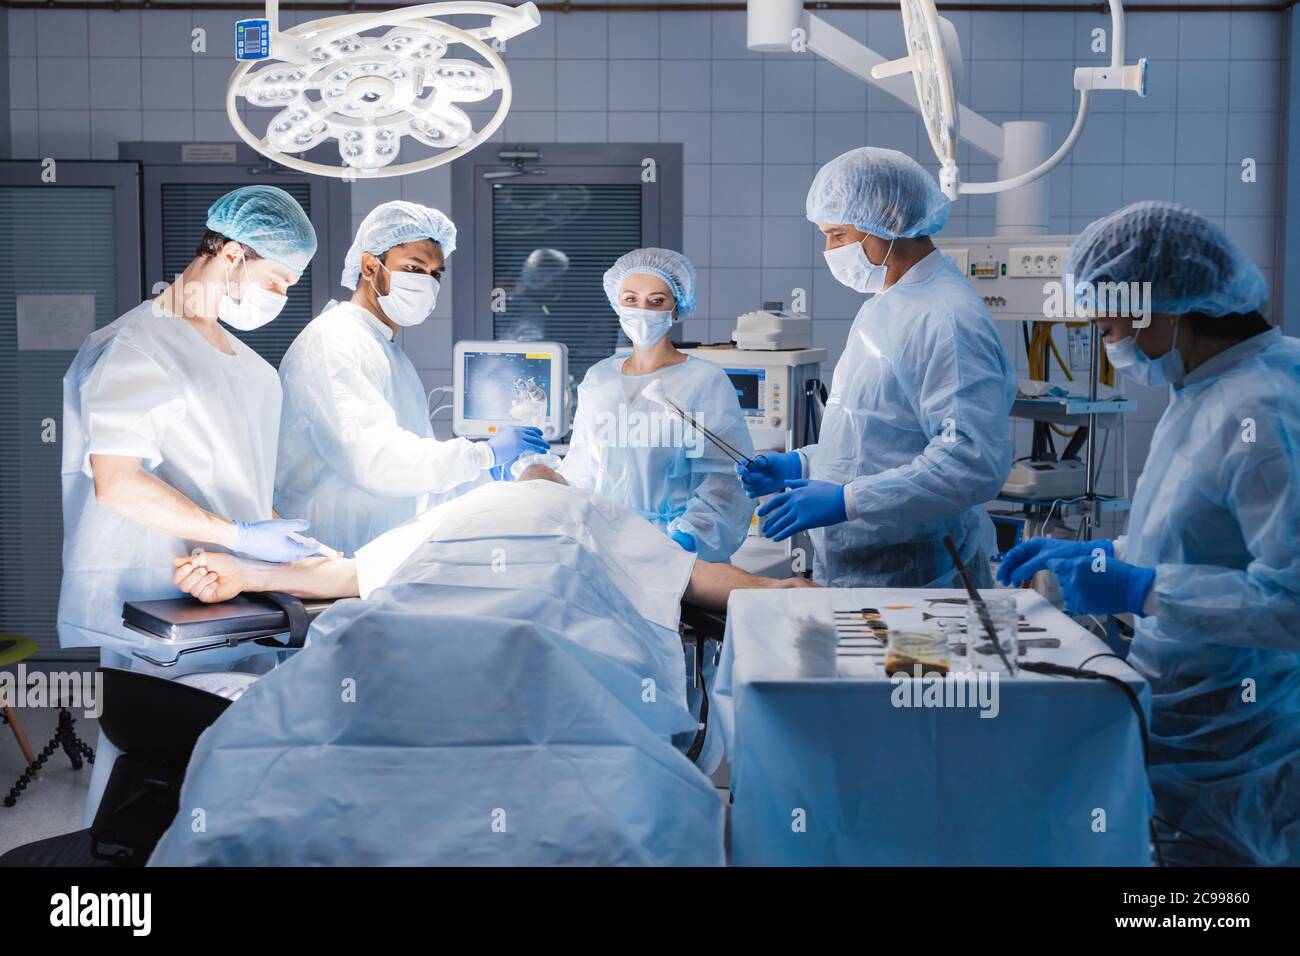 Medical team preparing equipment for surgery in operation room. Stock Photo